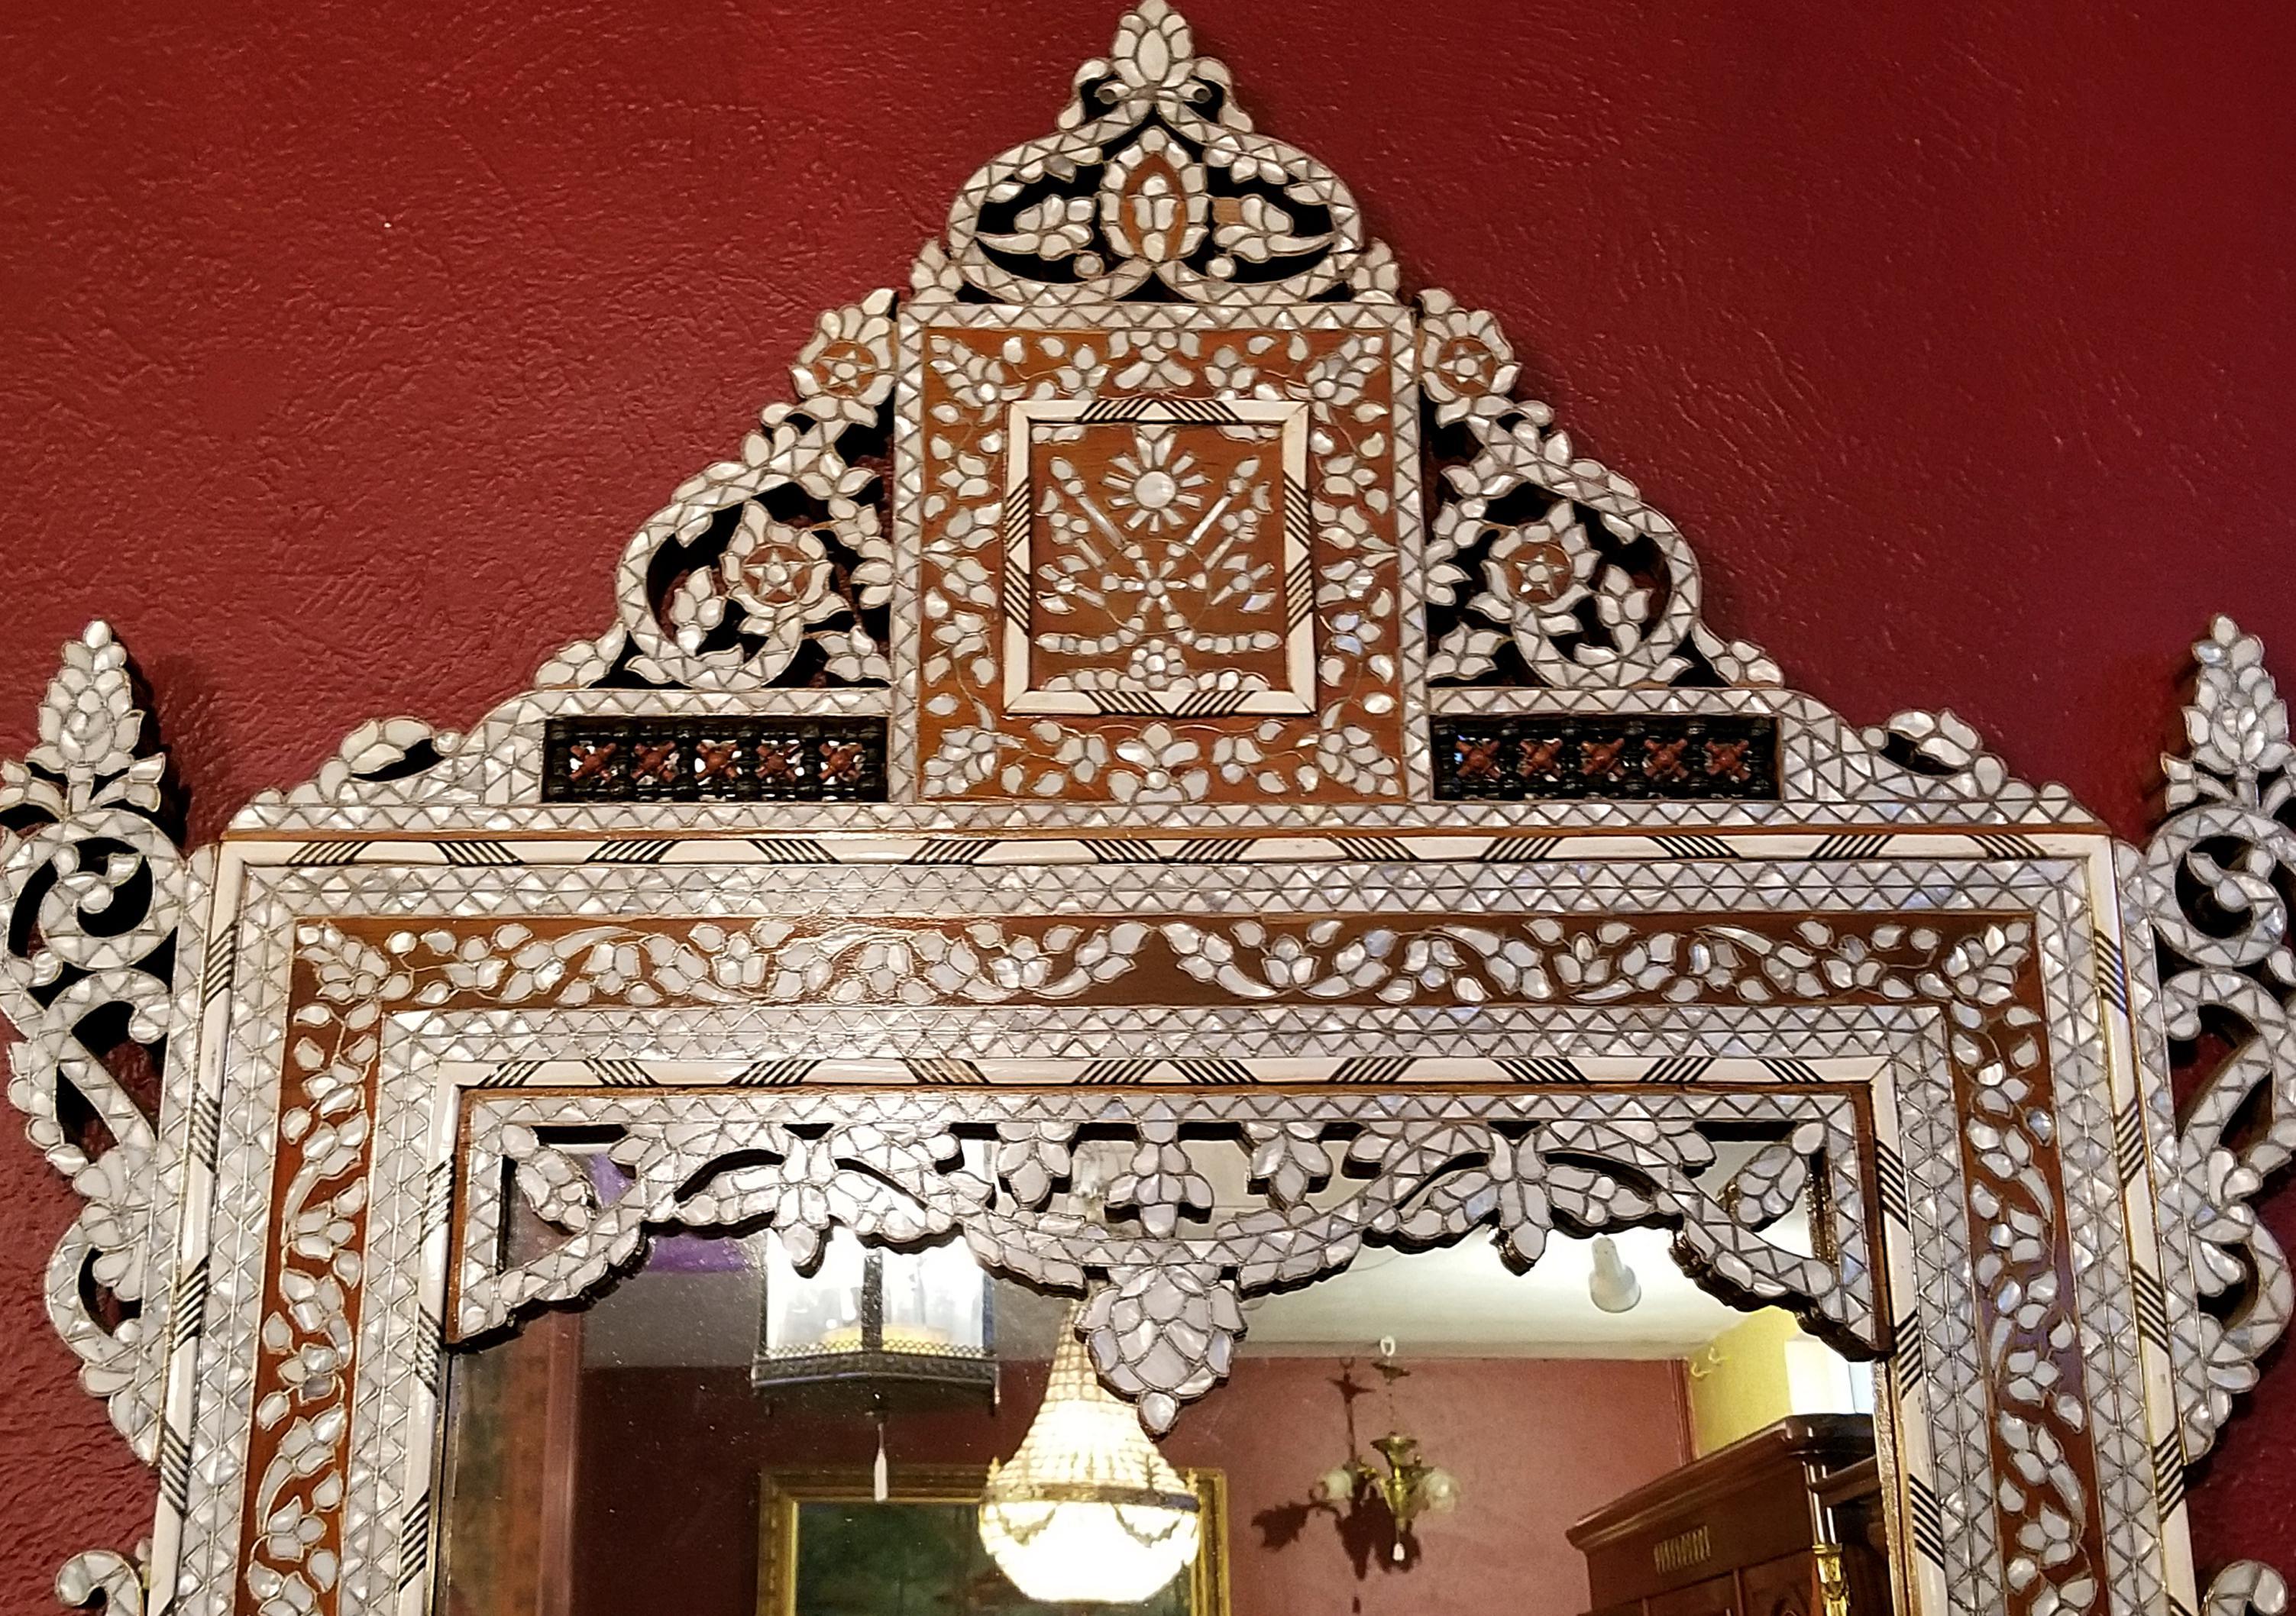 Hand-Crafted Moroccan Bone and Mother of Pearl Inlaid Console Table and Mirror